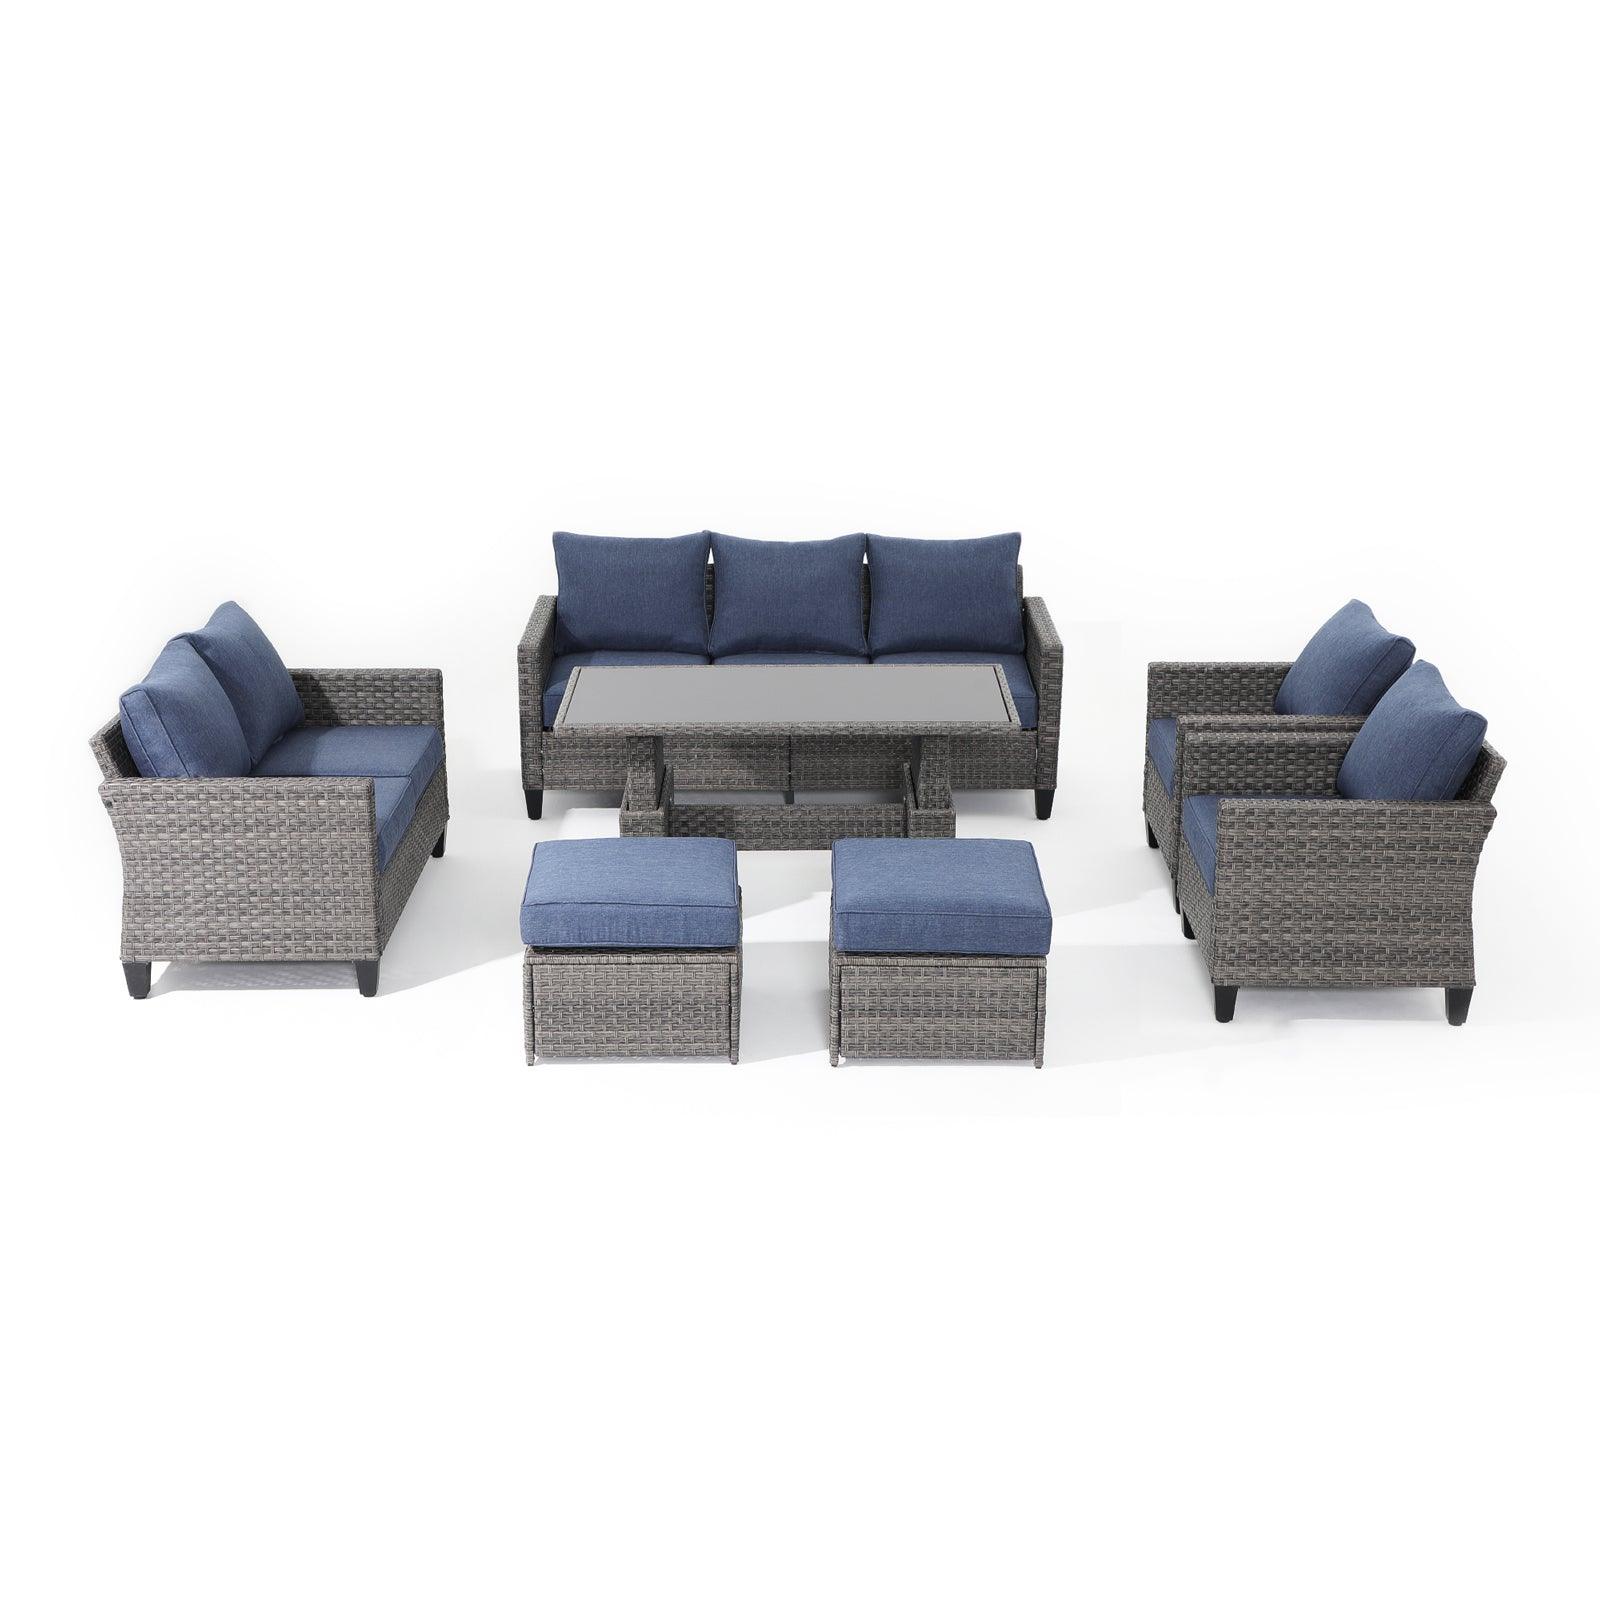 Ayia 7-Piece outdoor Sofa Set with Rattan design, Navy Blue cushions, a 3-seater sofa, 2 arm chairs , 2 ottomans, 1 loveseat, 1 lift-top dining table - Jardina Furniture #color_Navy blue#piece_7-pc. with ottomans & Table